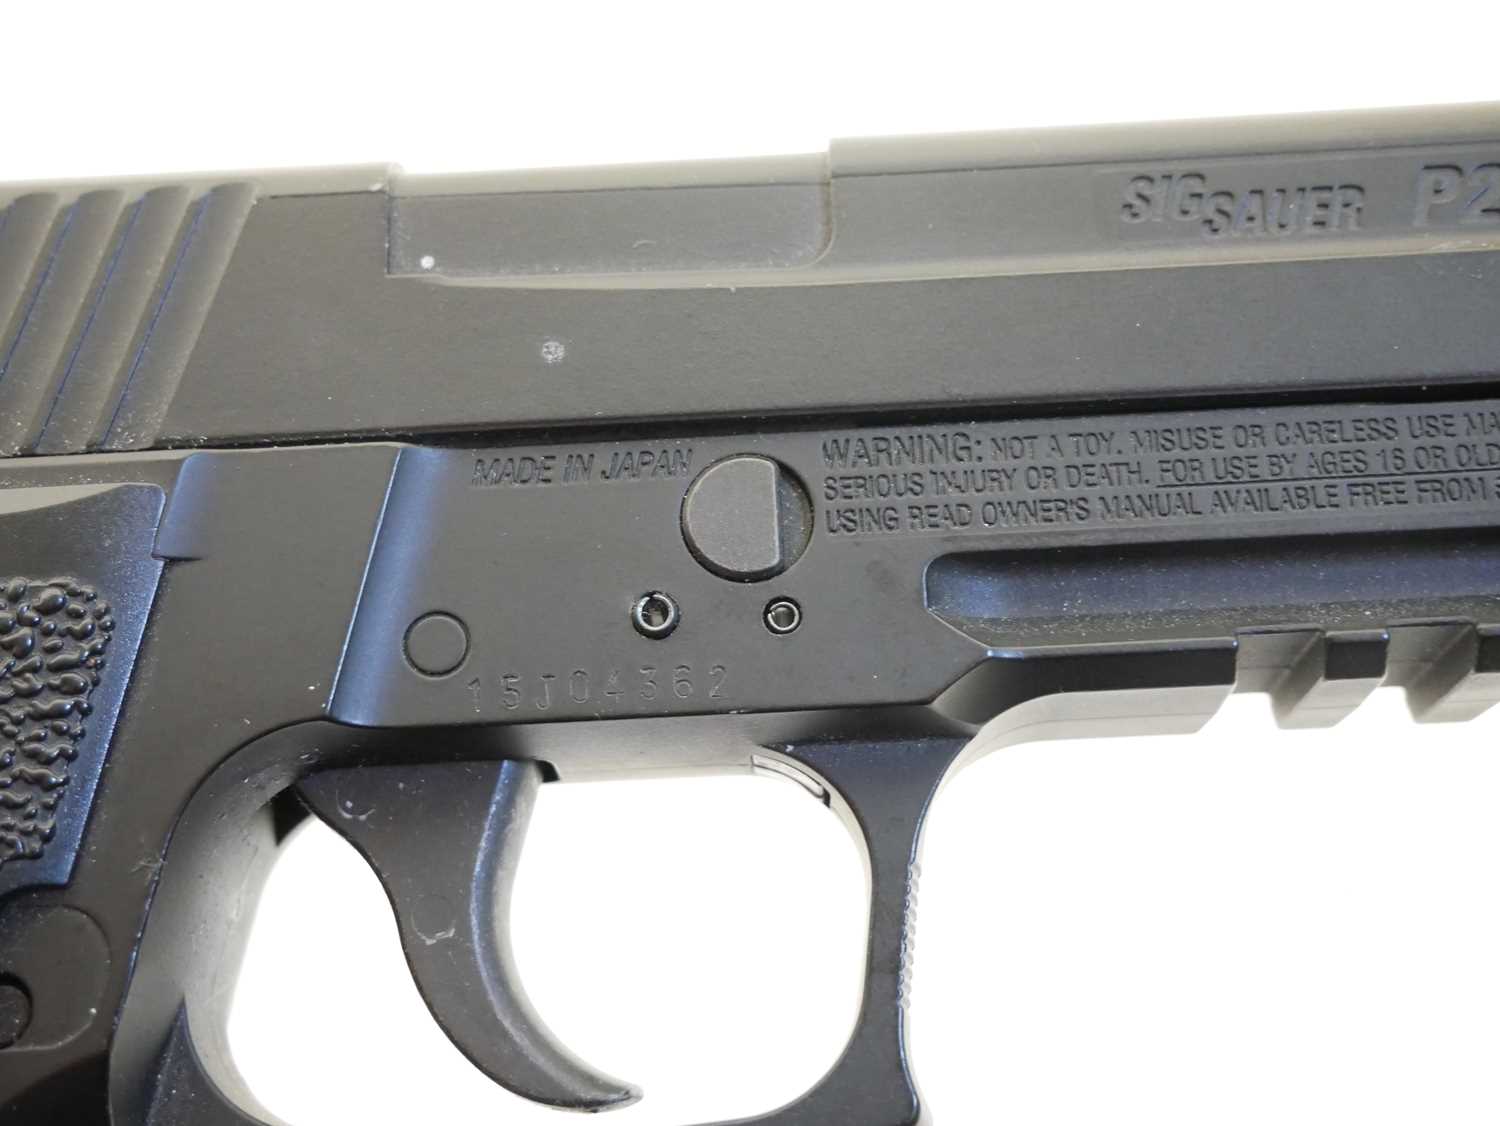 Sig Sauer P226 .177 blowback air pistol serial number 15J04362, with one double-end rotary magazine. - Image 5 of 6